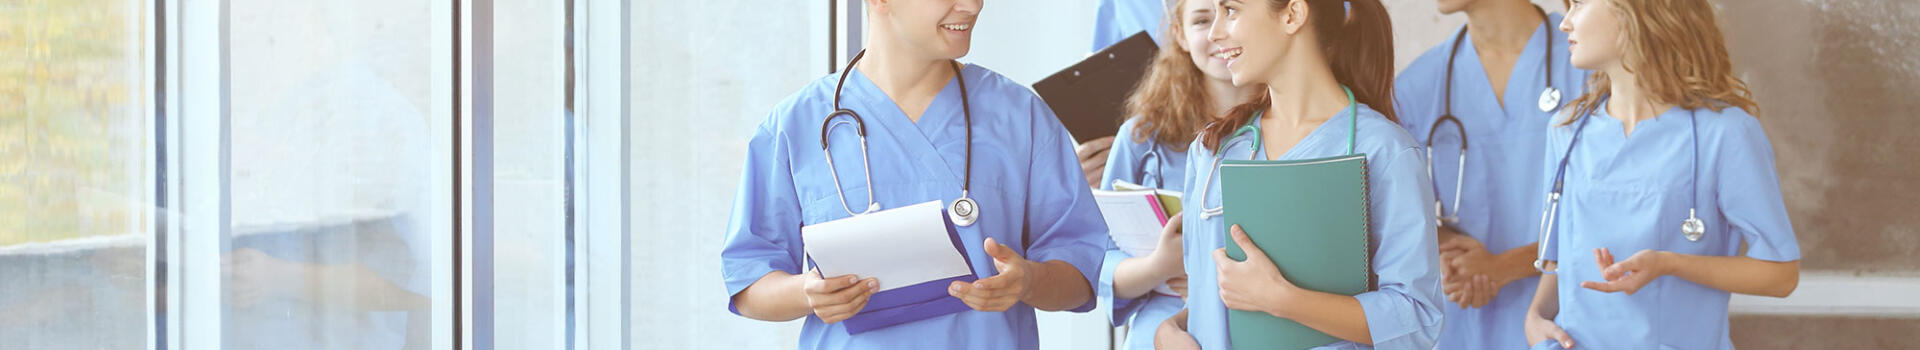 doctors-and-nurses-with-clipboards